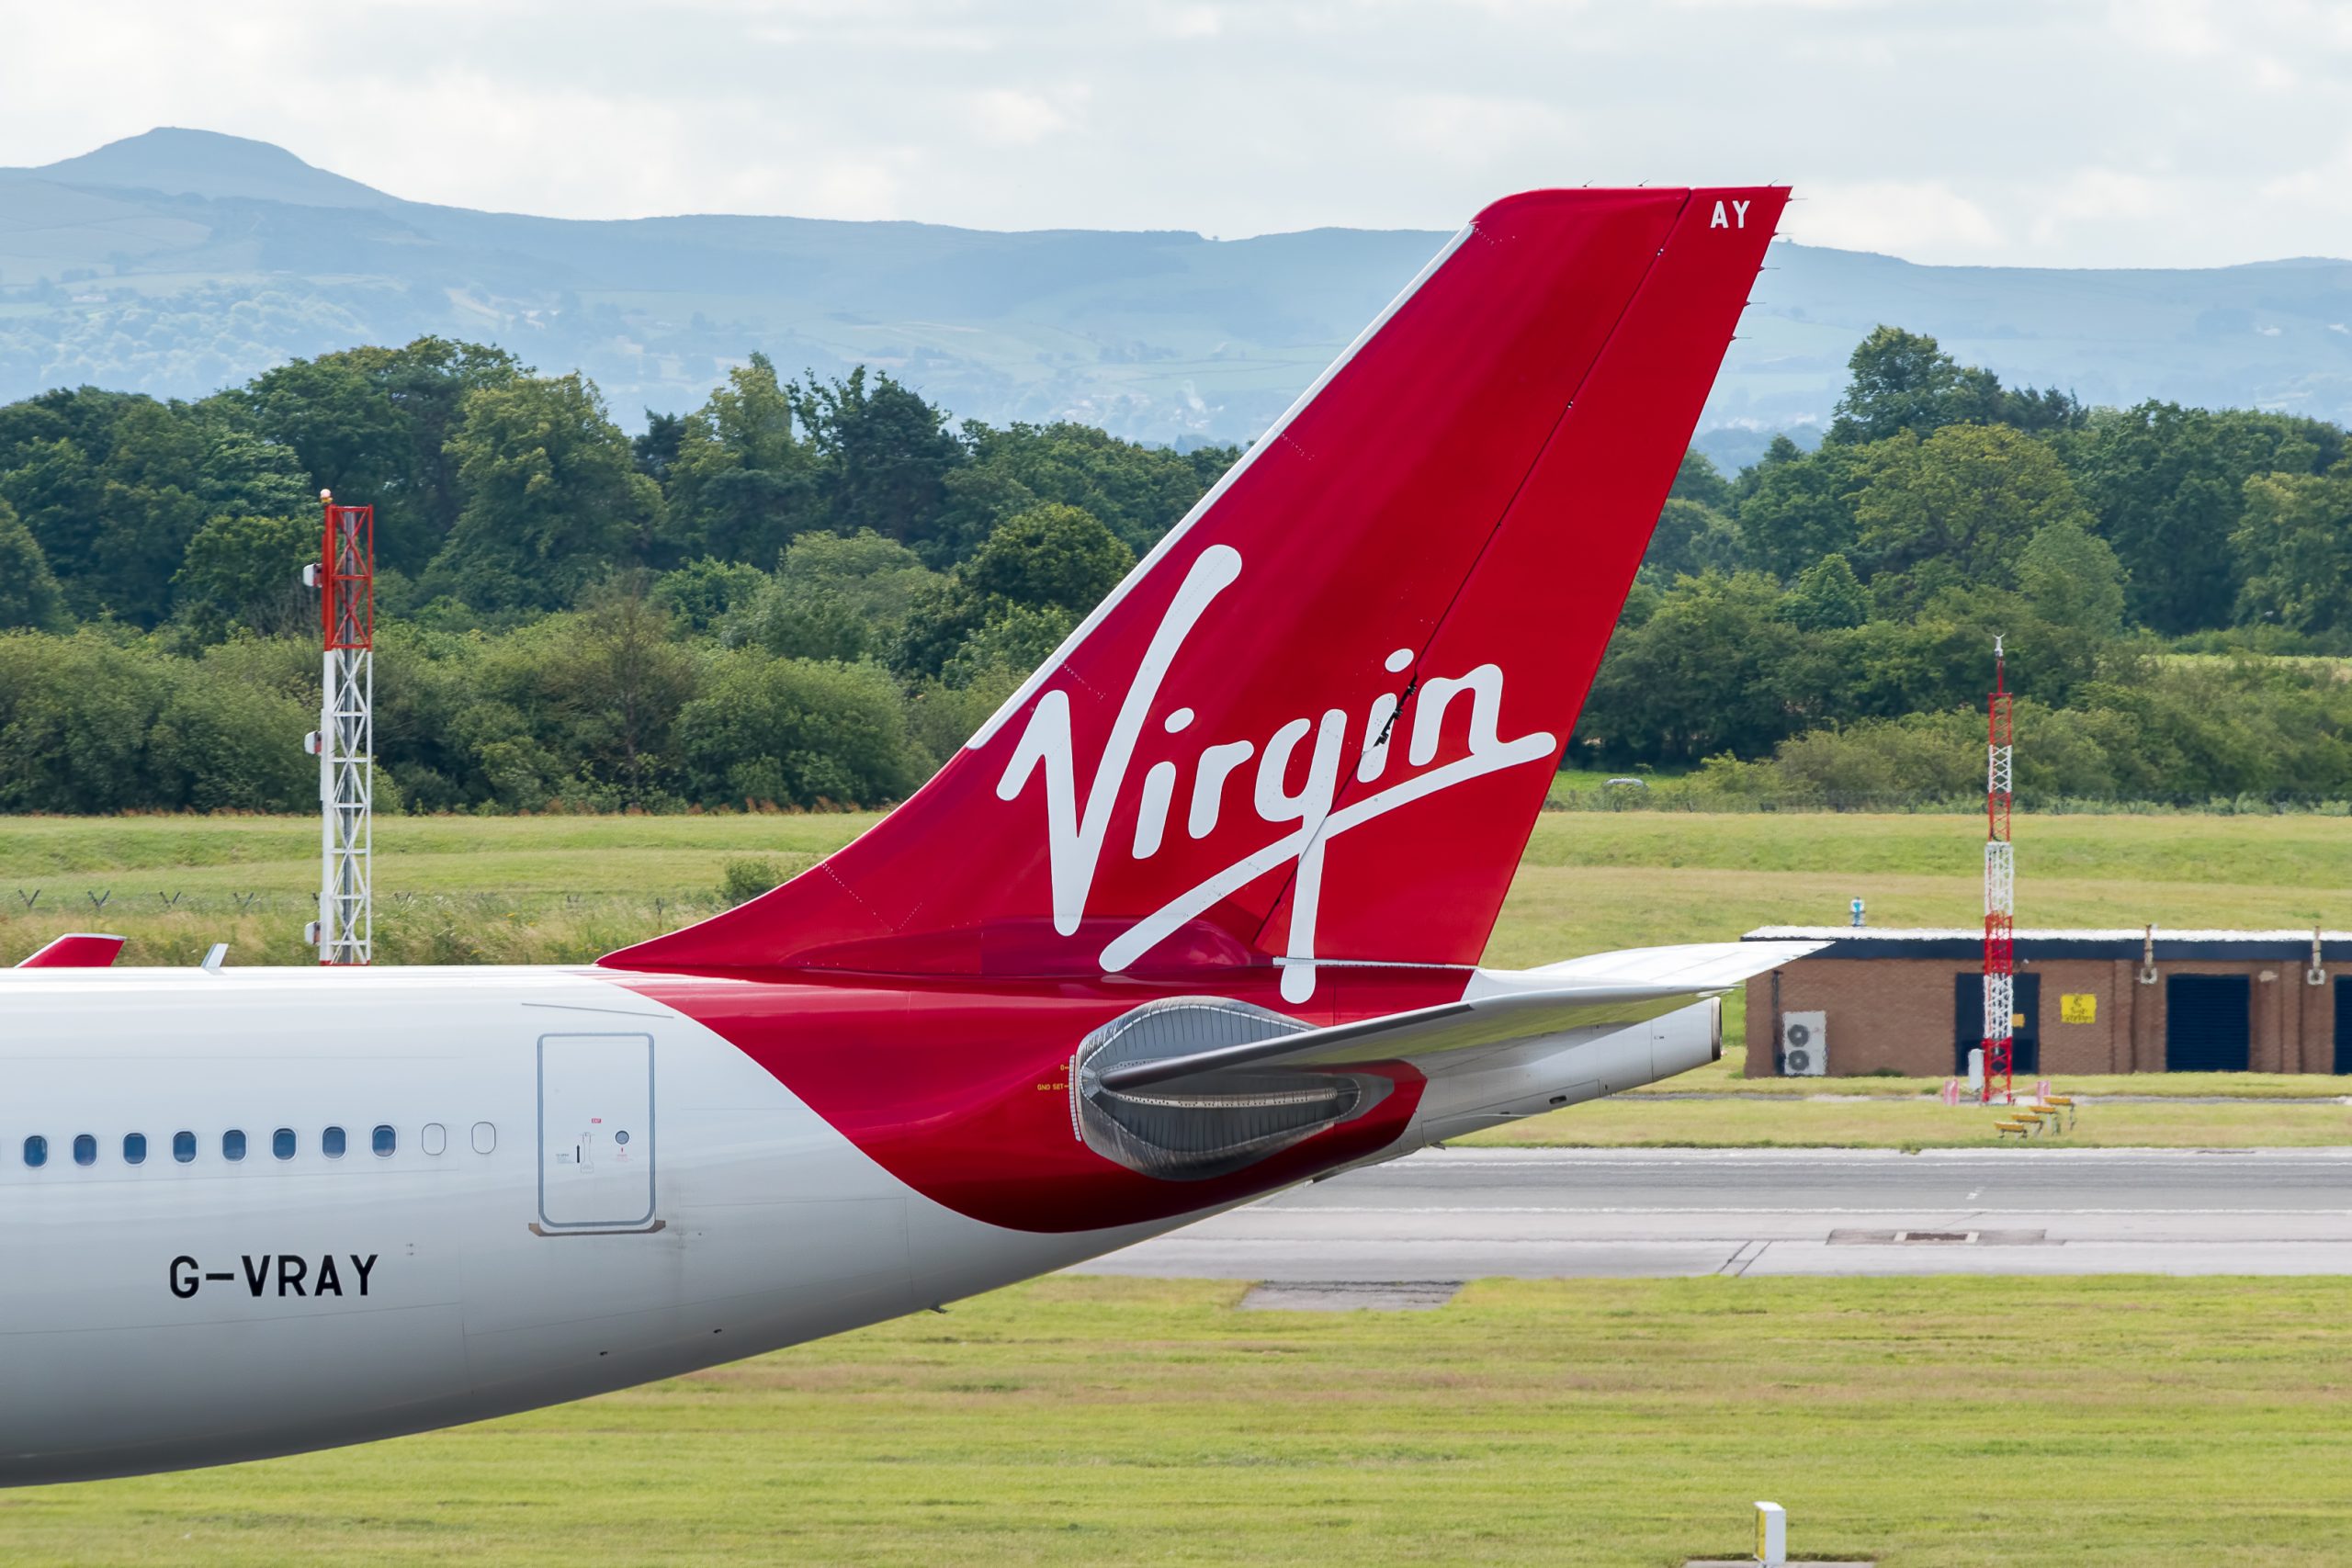 Fly Virgin Atlantic with Amex points